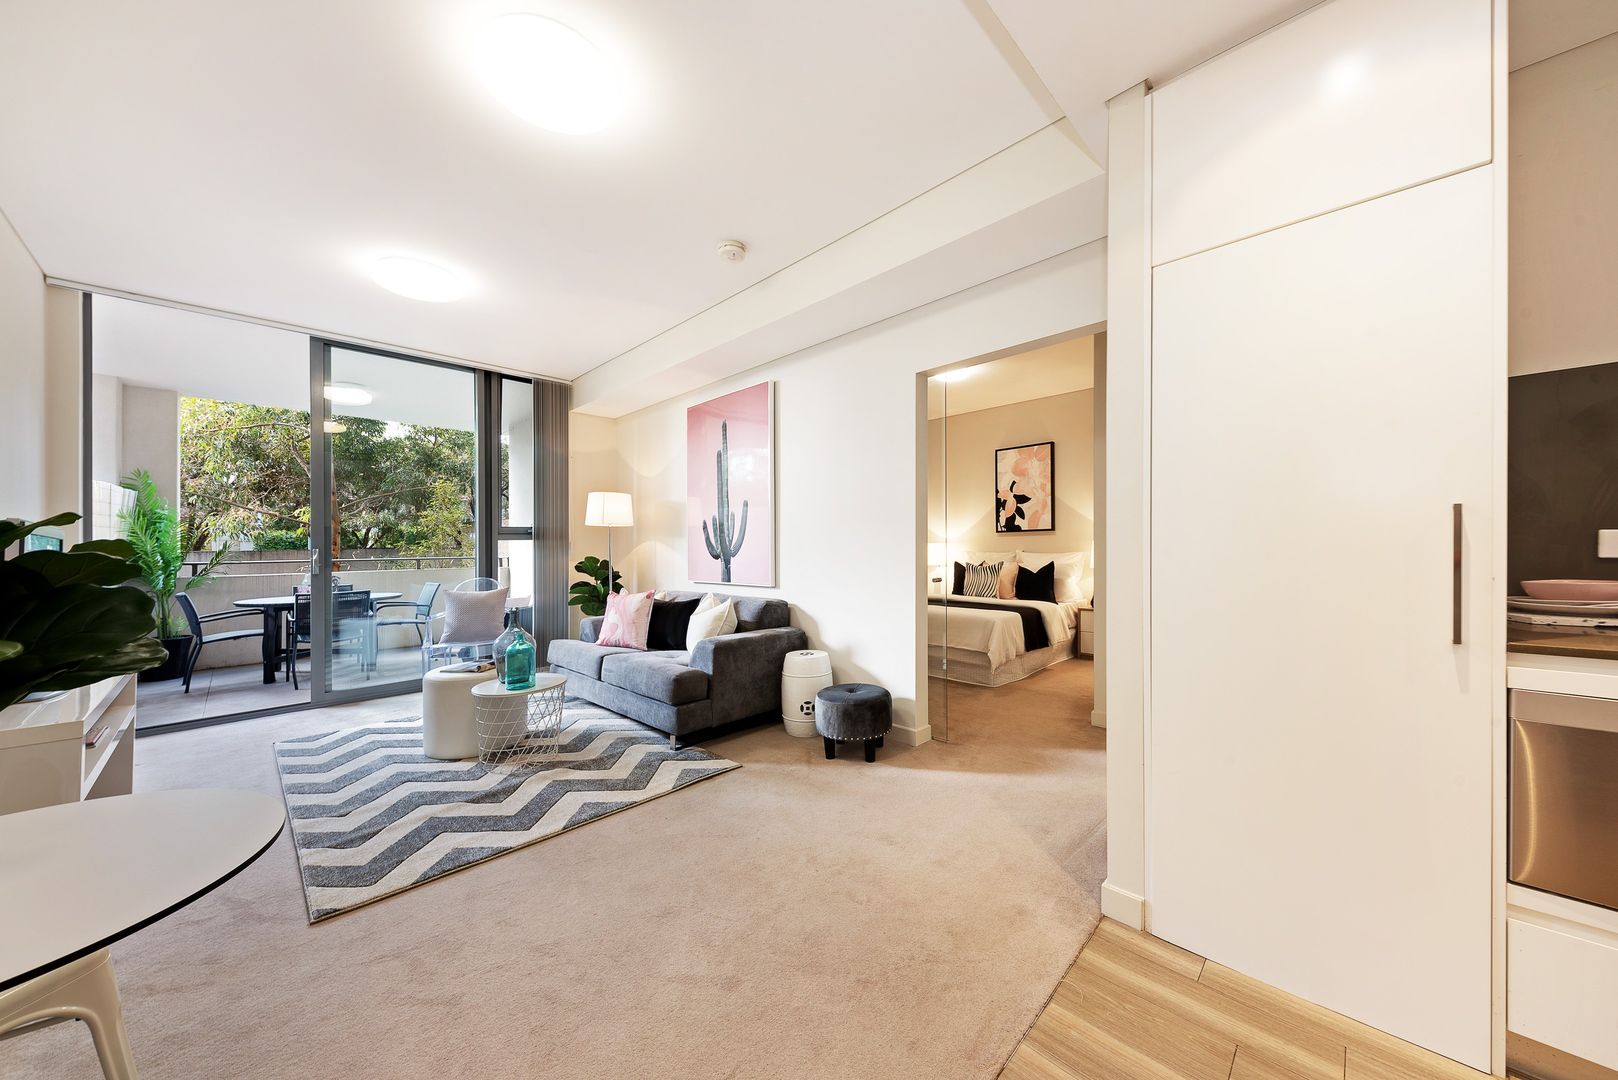 42/554-560 Mowbray Road West, Lane Cove North NSW 2066